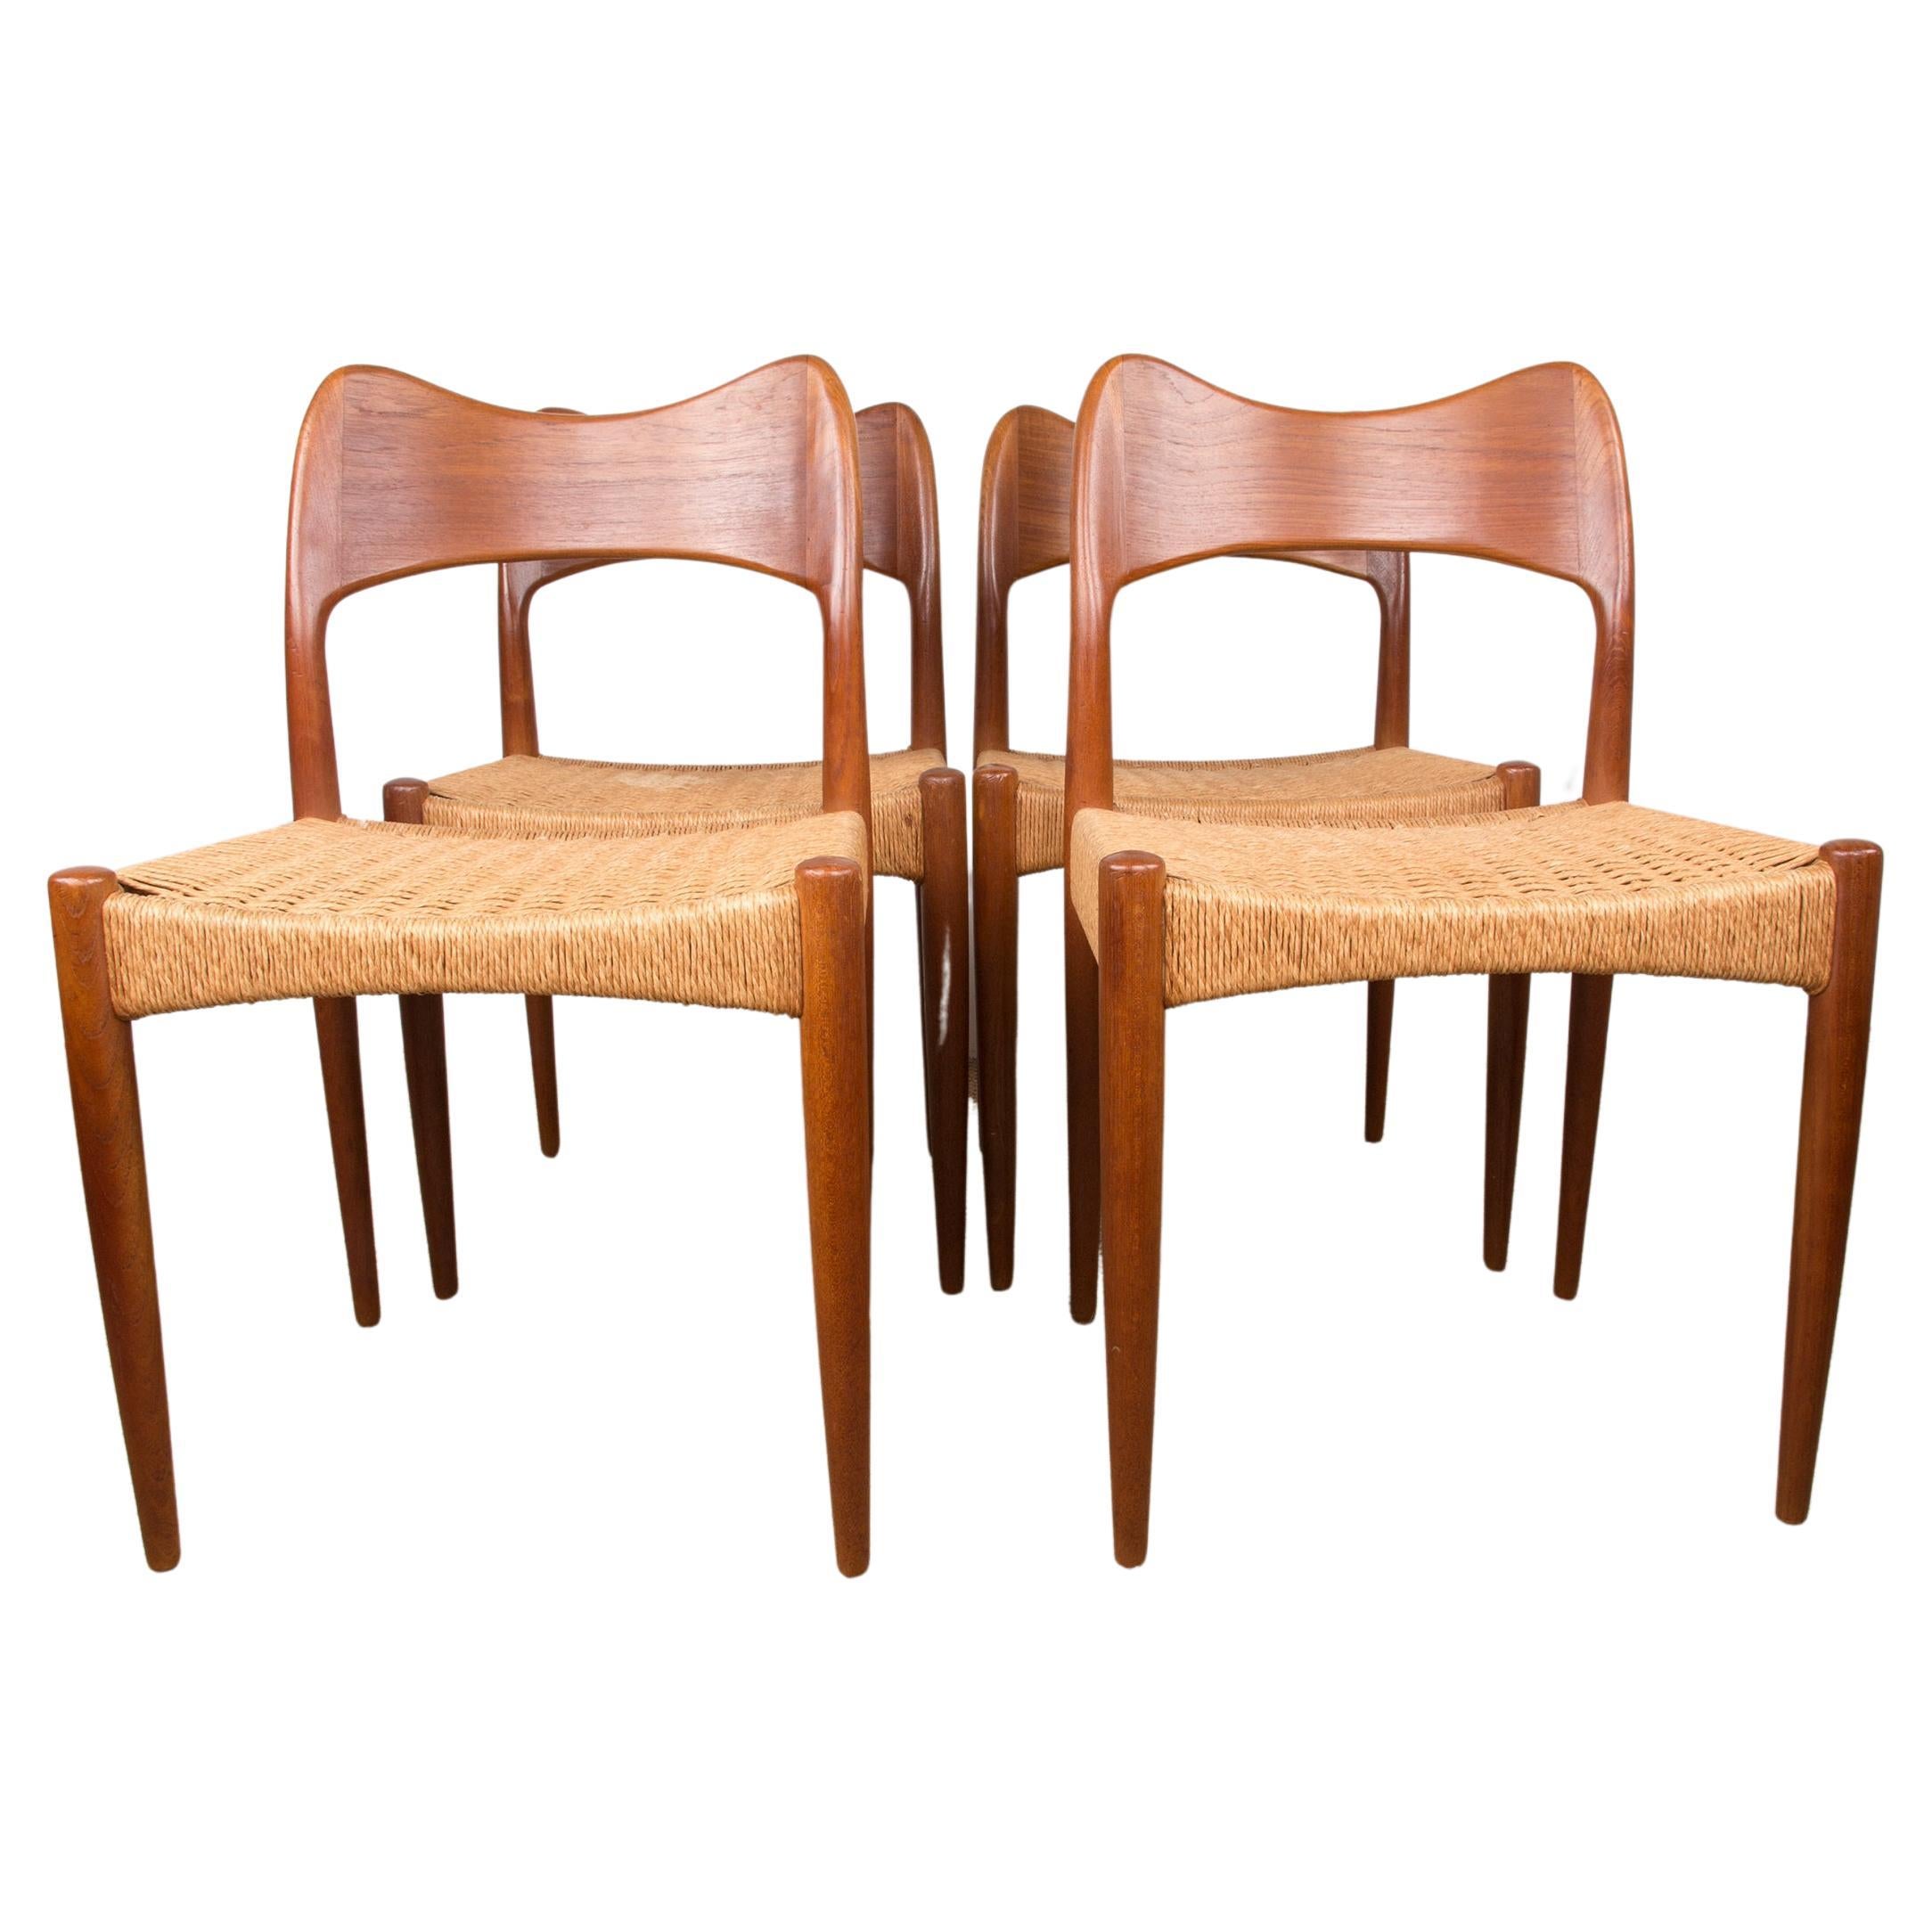 Series of 4 Danish Teak and Cordage chairs by Arne Hovmand Olsen 1960. For Sale